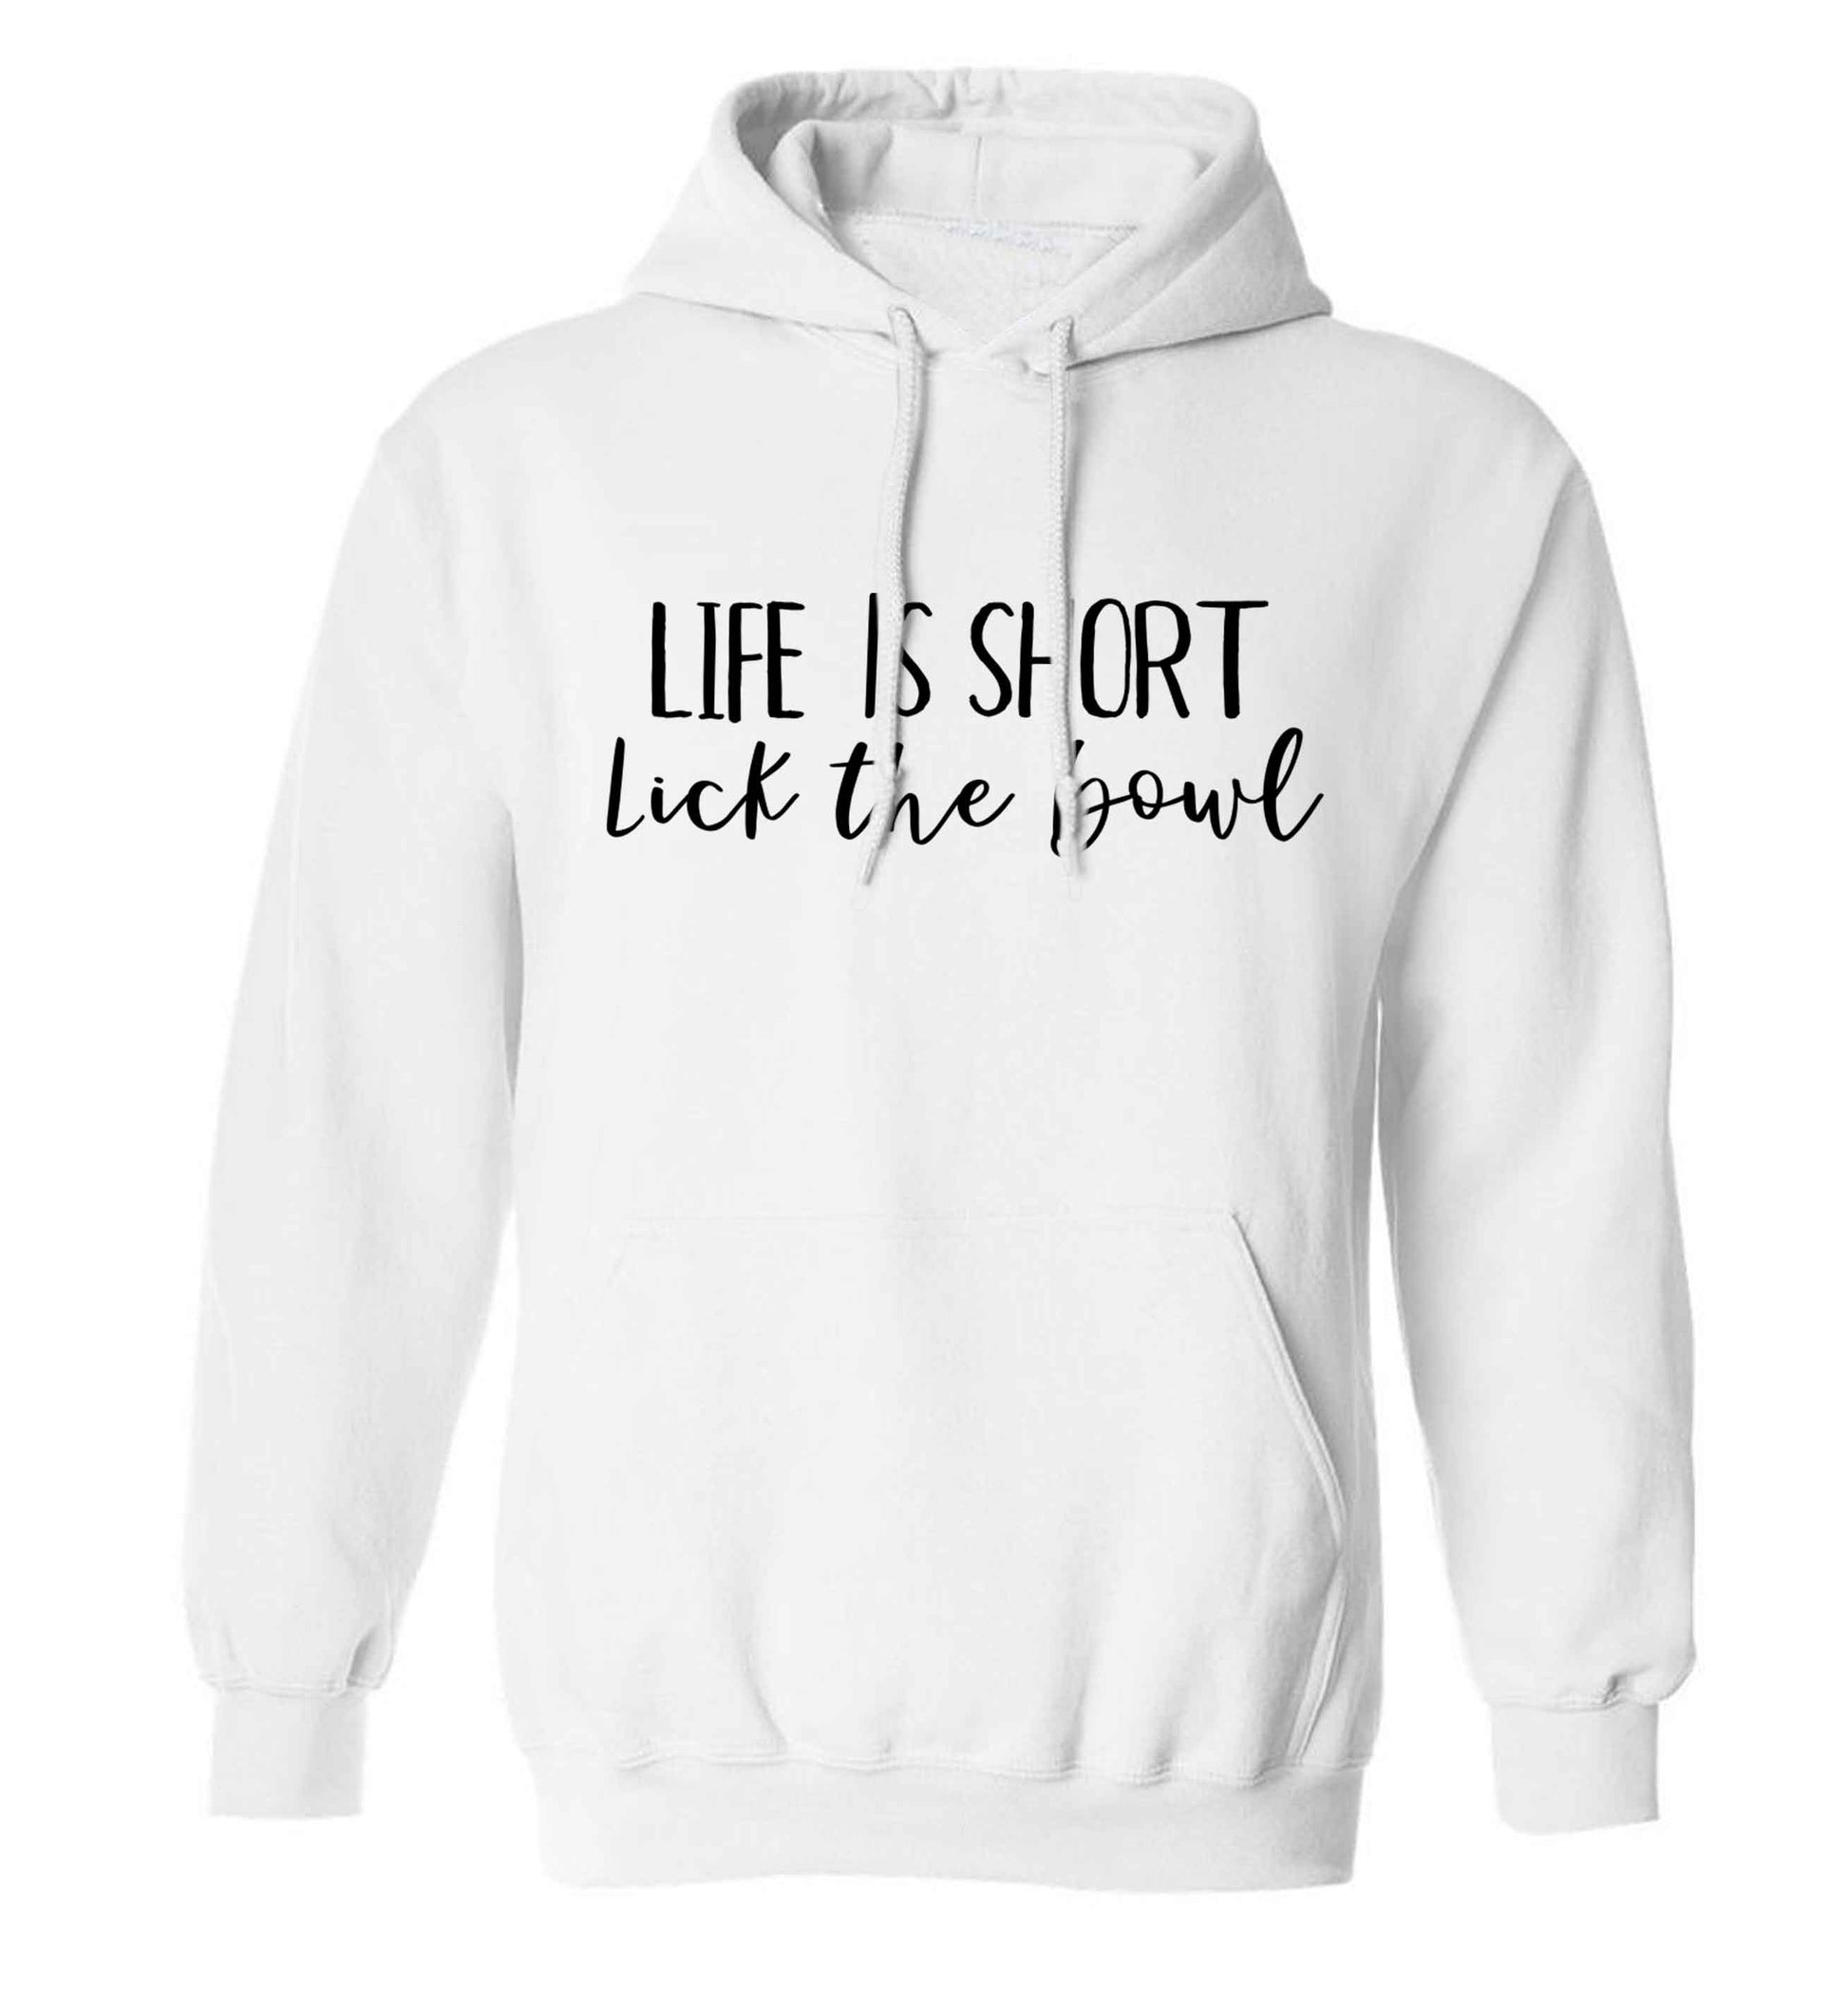 Life is short lick the bowl adults unisex white hoodie 2XL